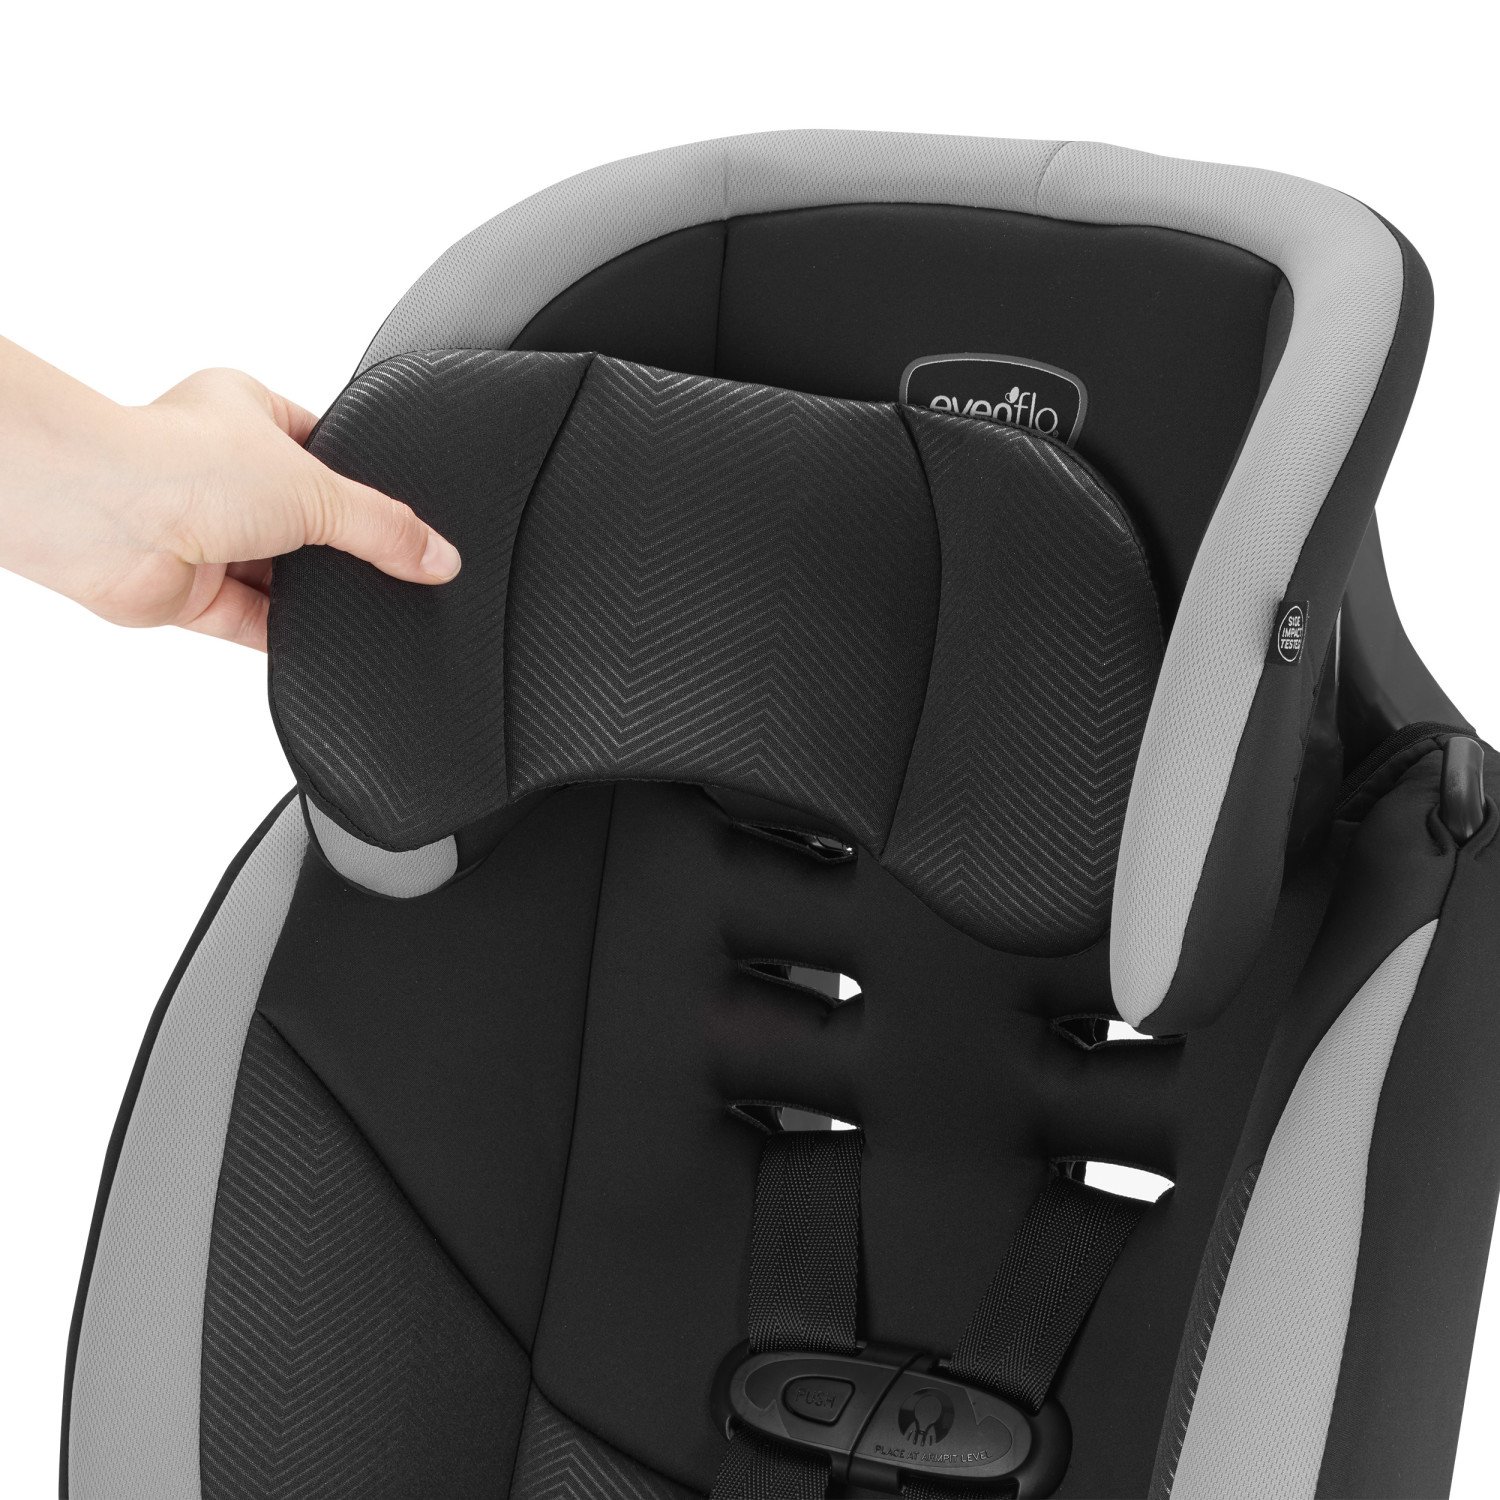 How To Install Evenflo Maestro Car Seat Stroller